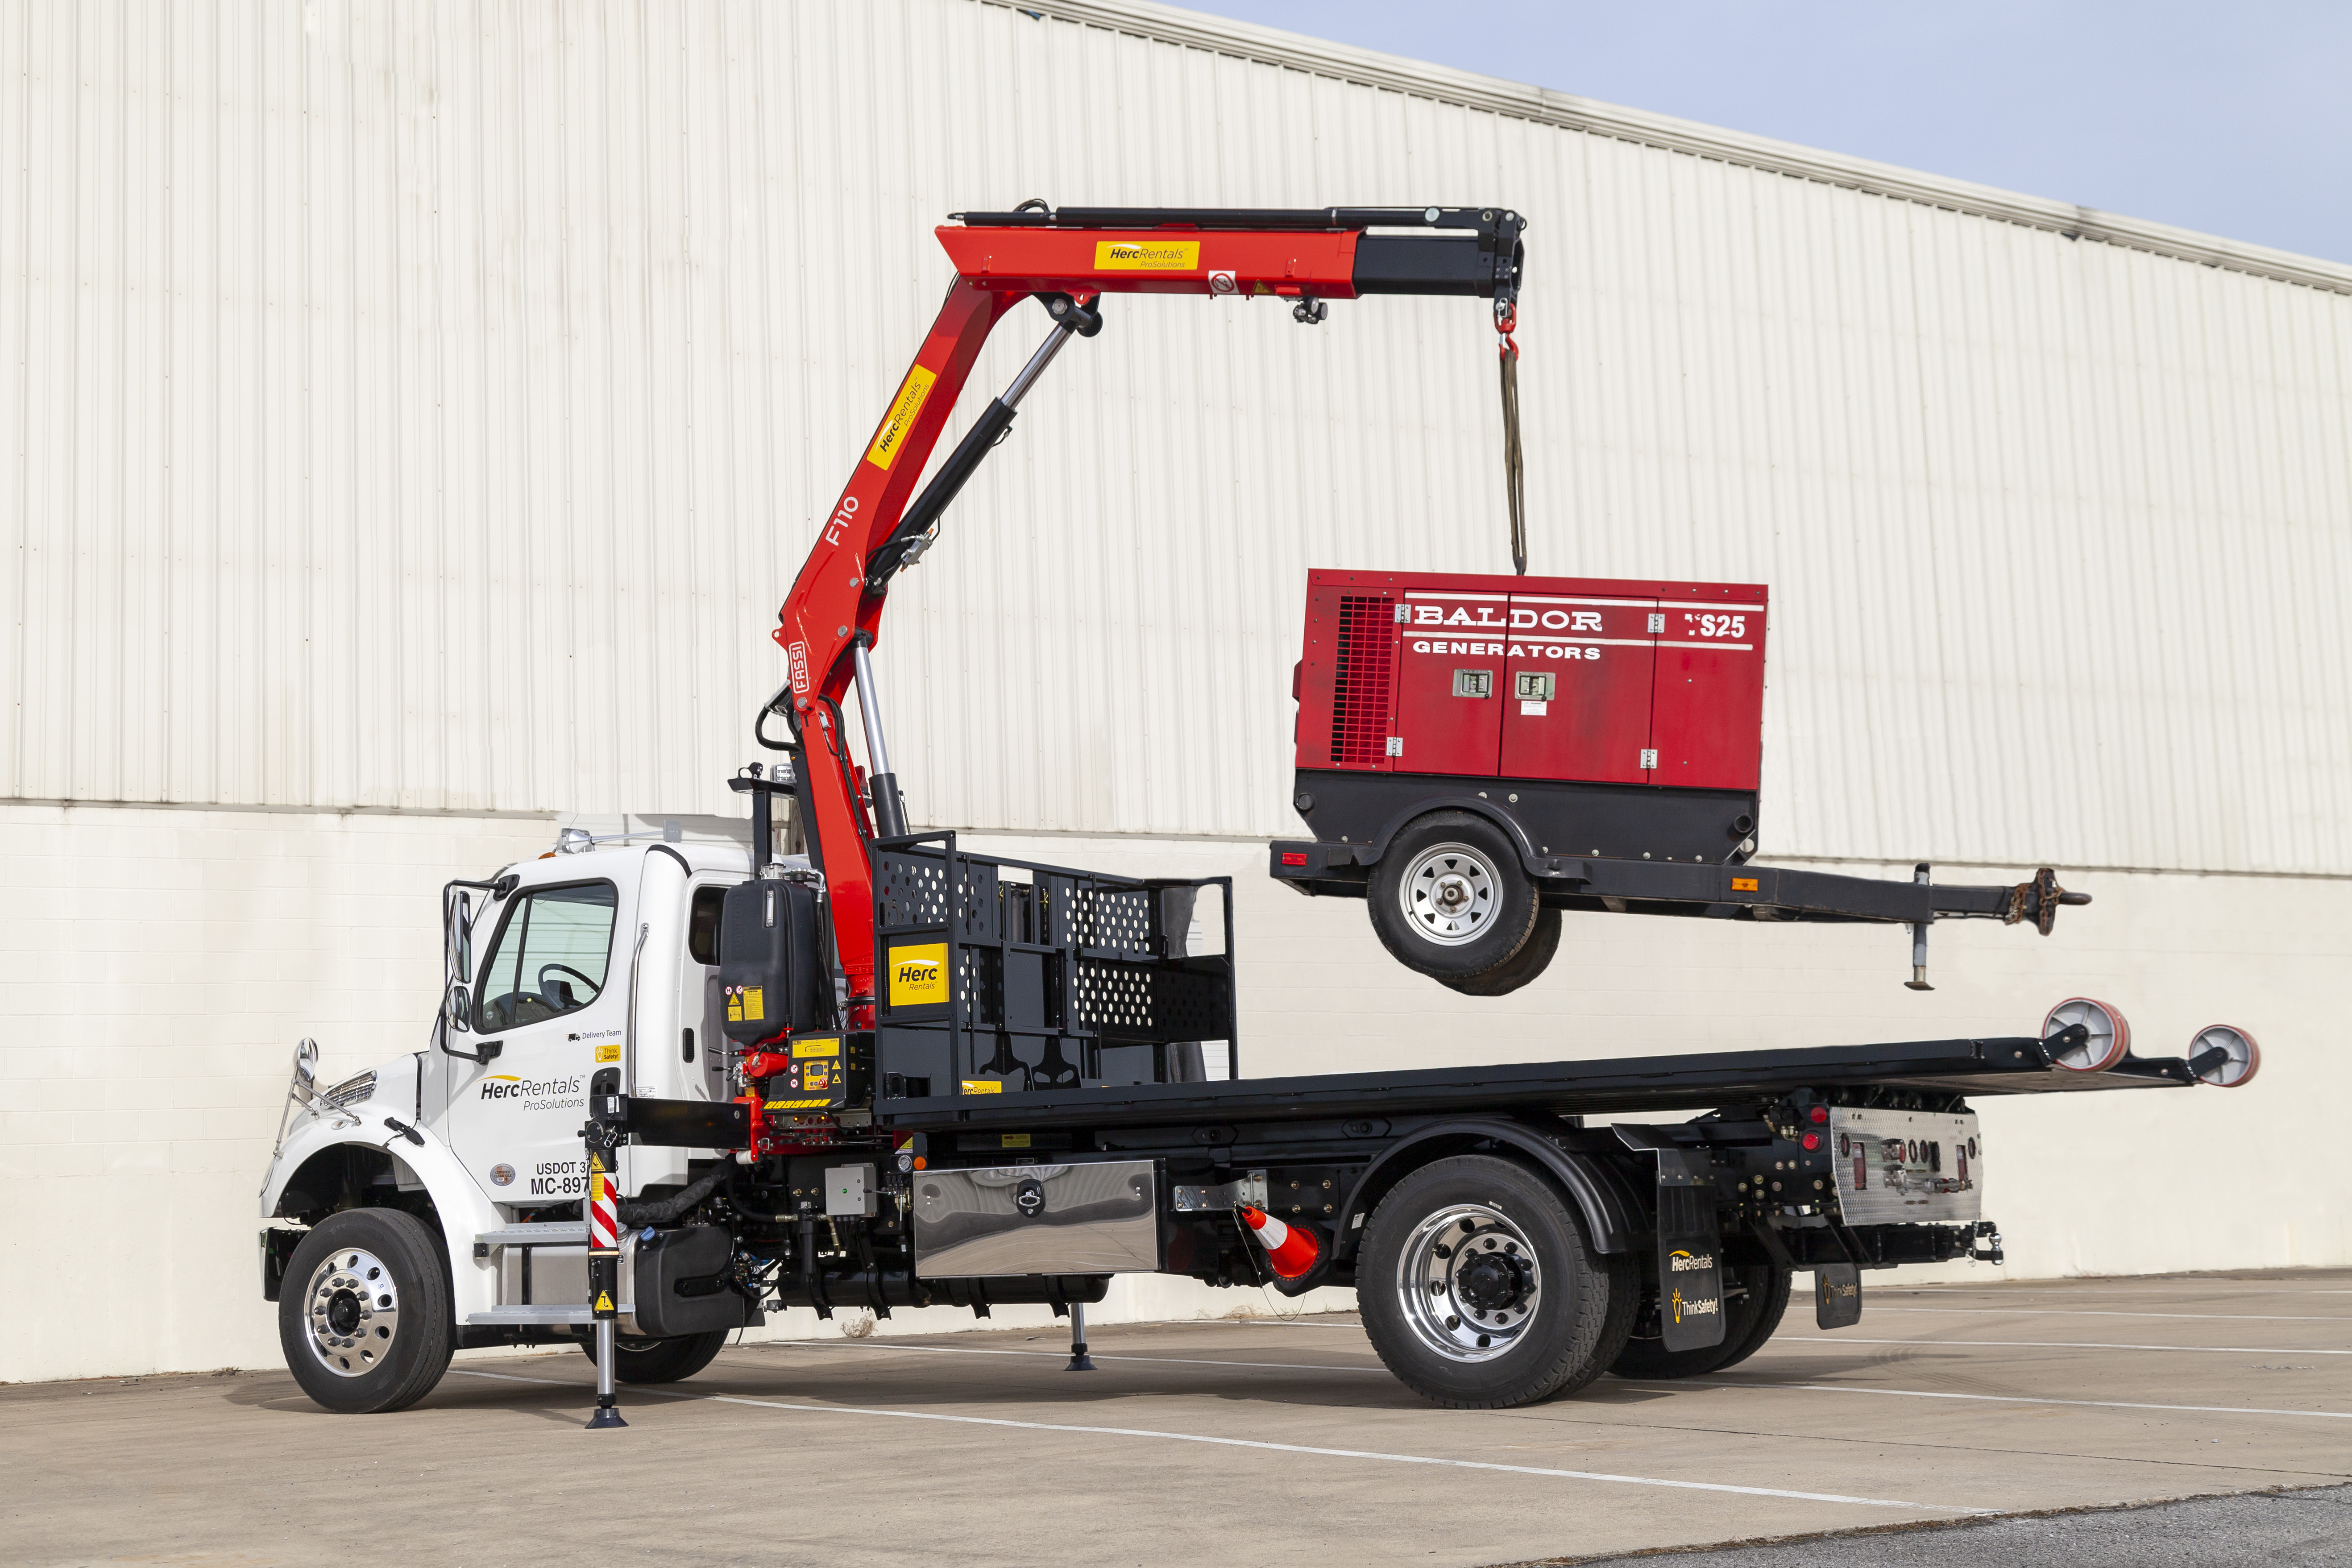 The Titan® C-Series optional remote hydraulic crane helps to unload equipment in crowded job sites with a small work area